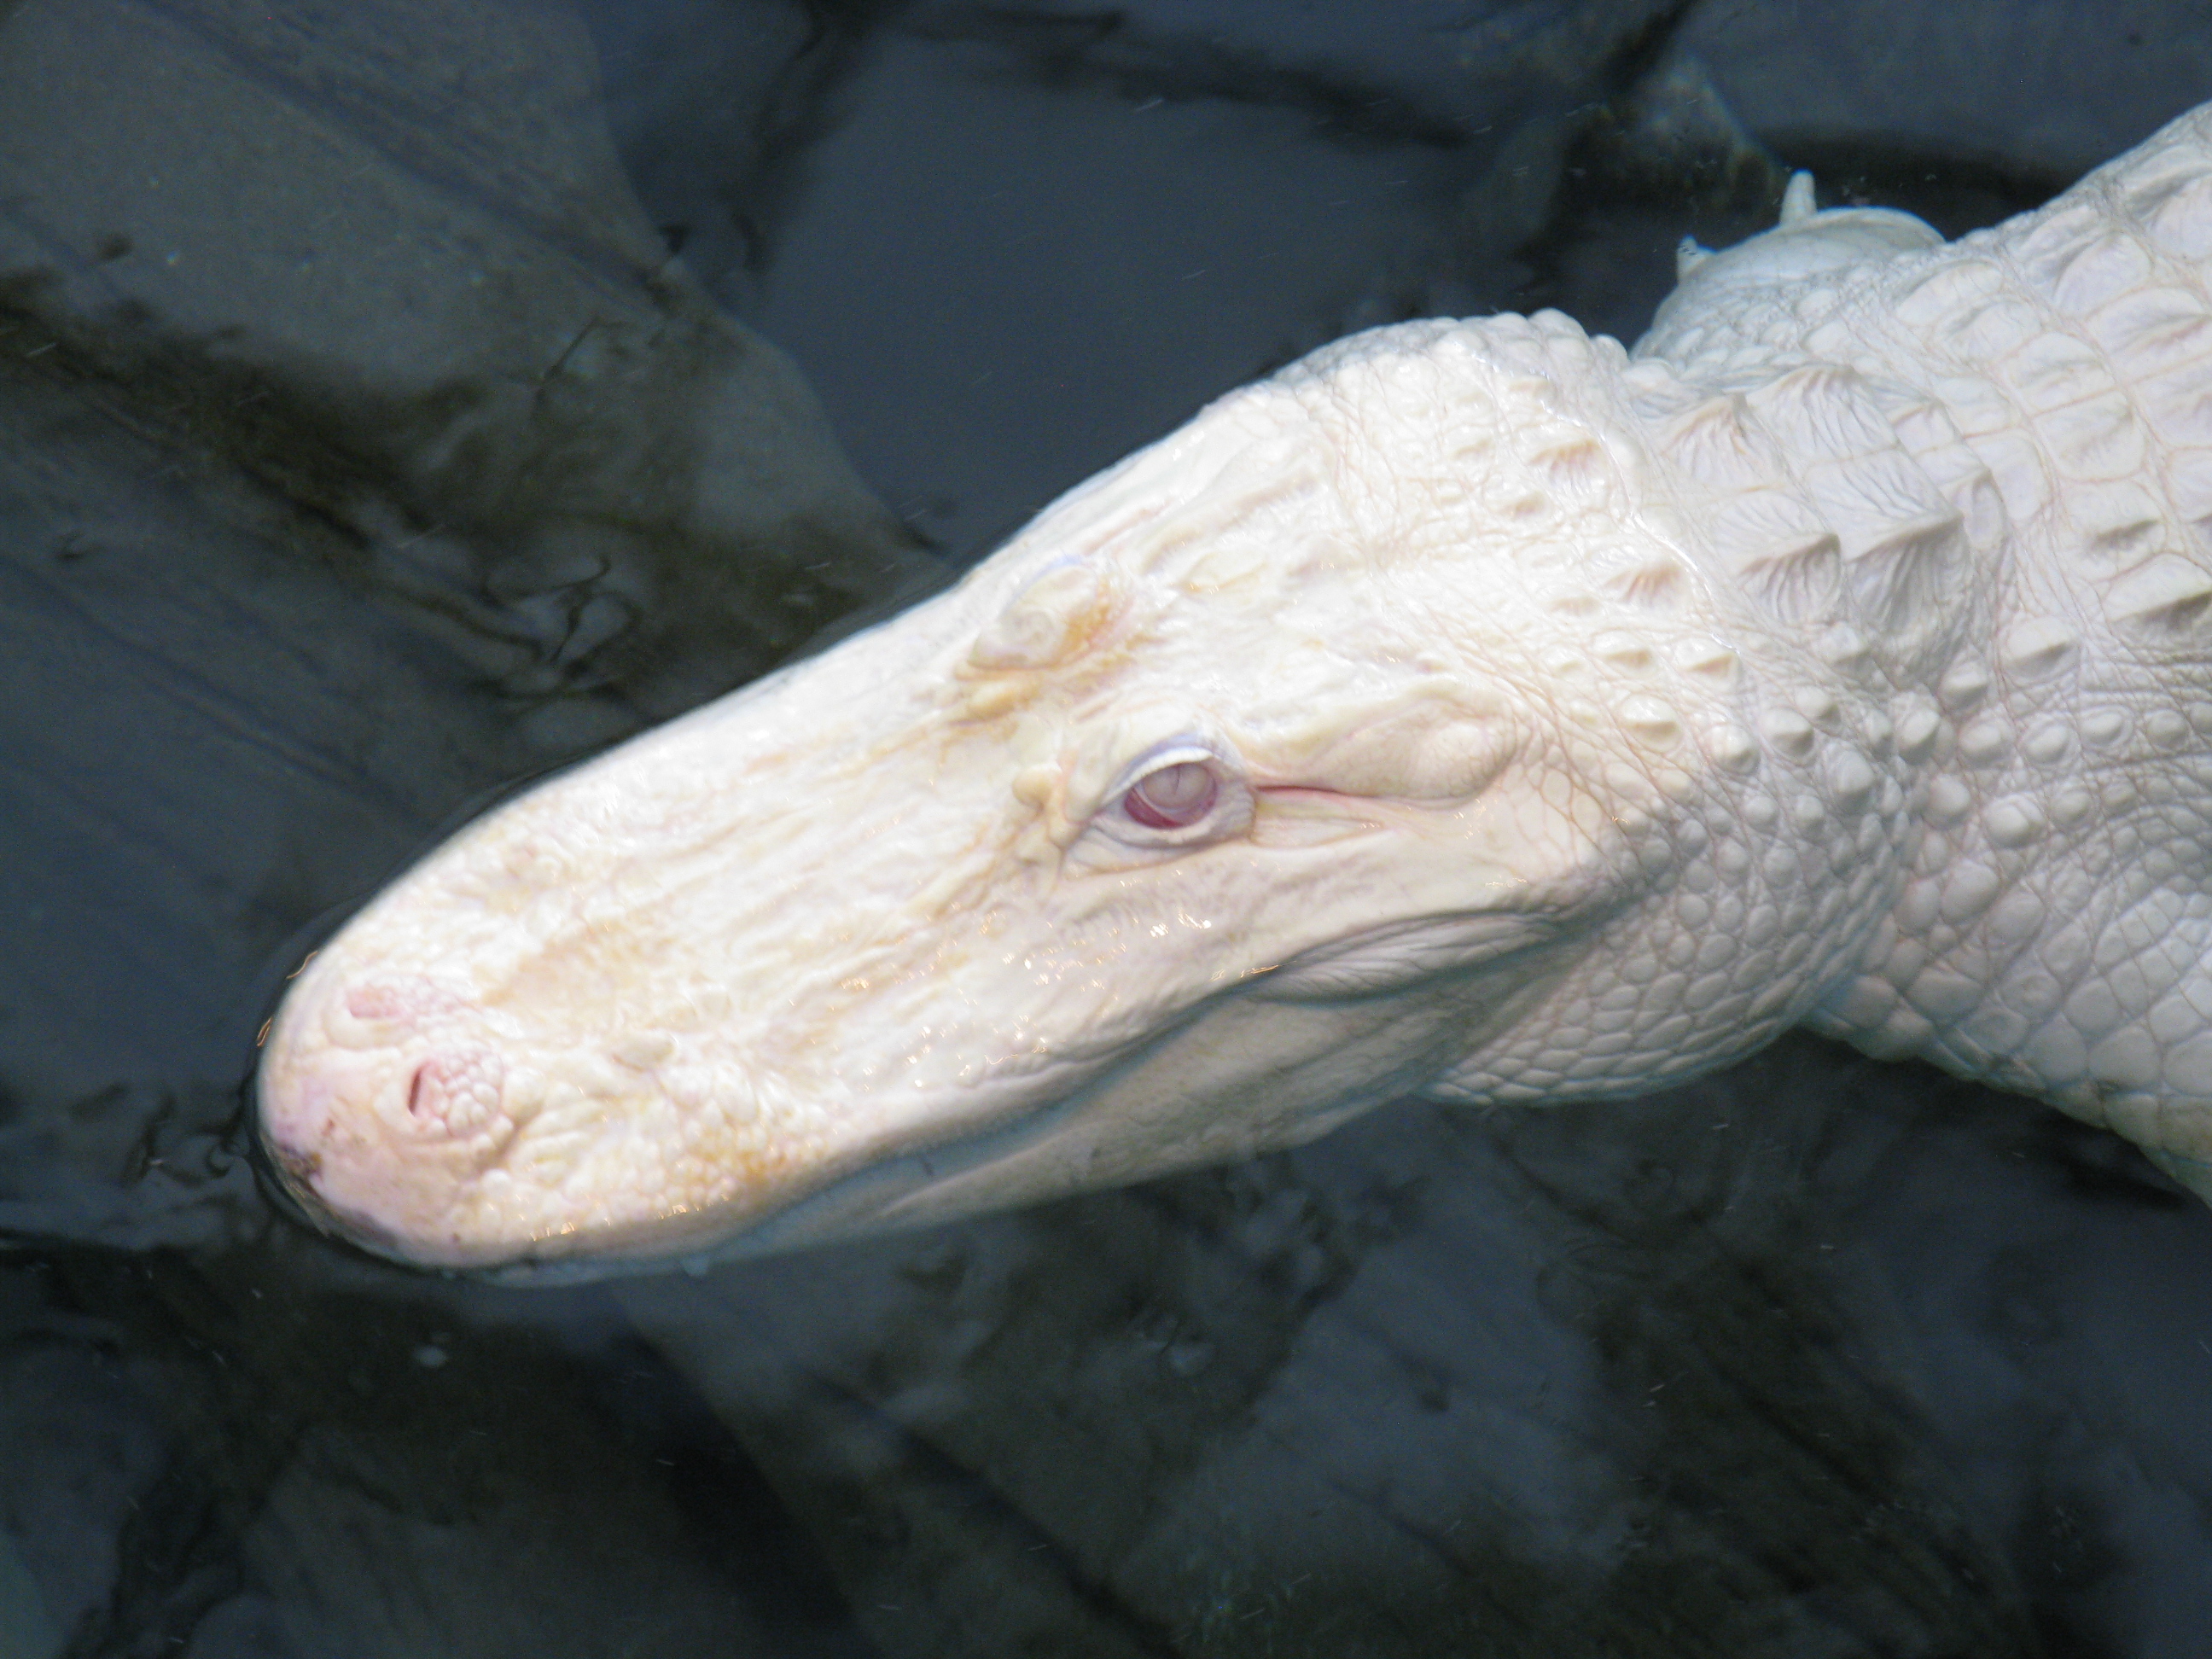 Albino Animals - Amazing Facts and Pictures